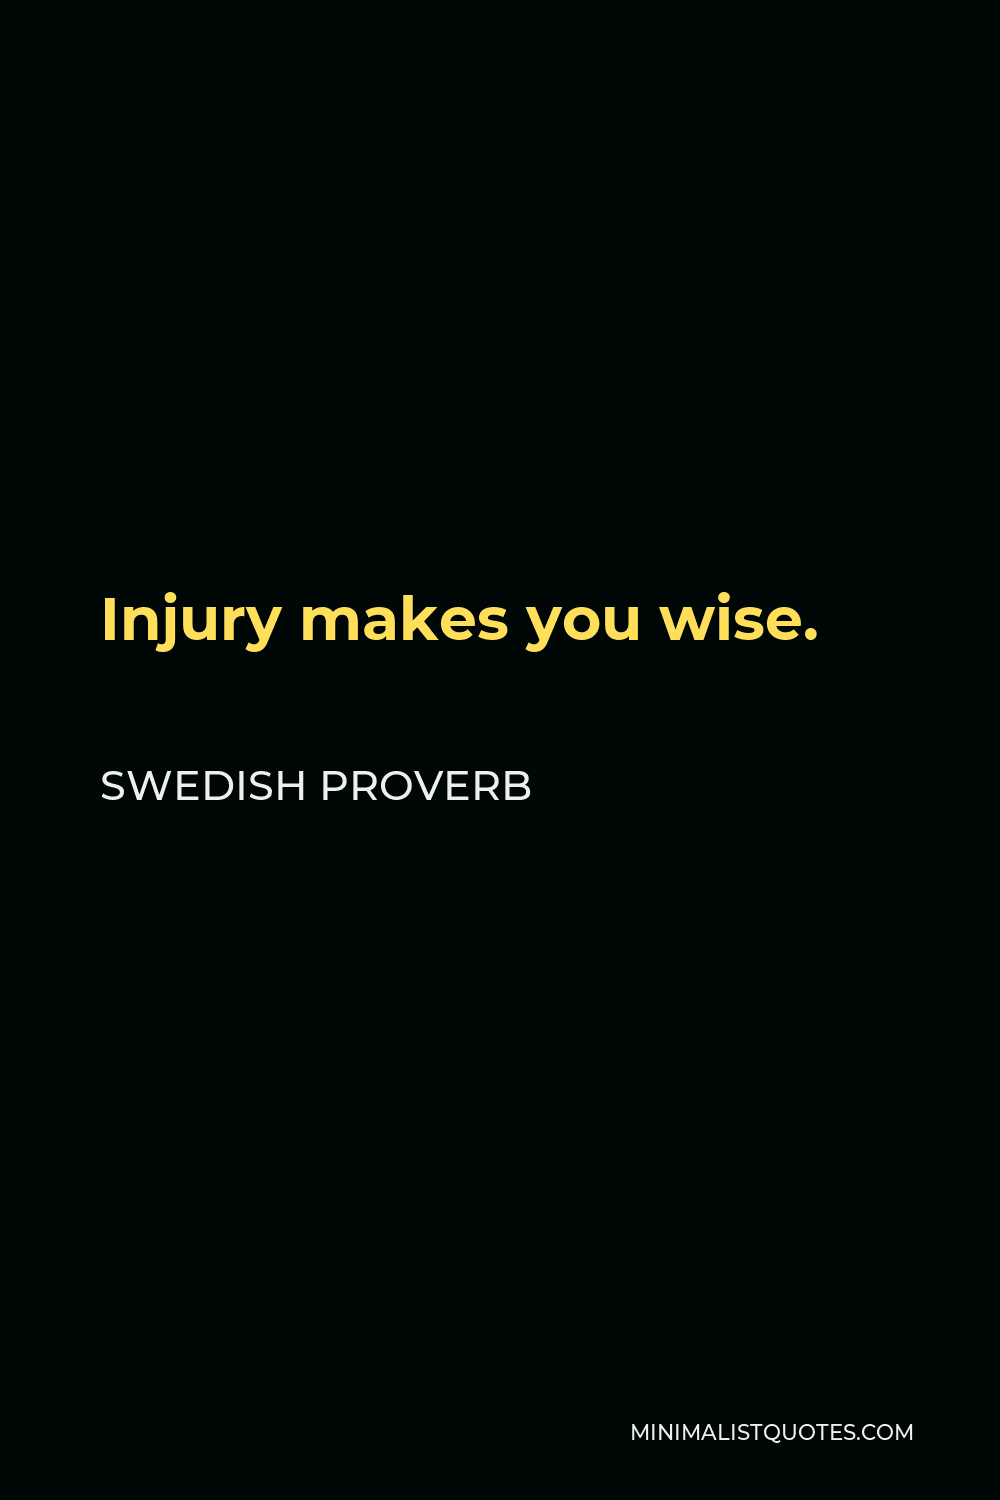 Swedish Proverb Quote - Injury makes you wise.